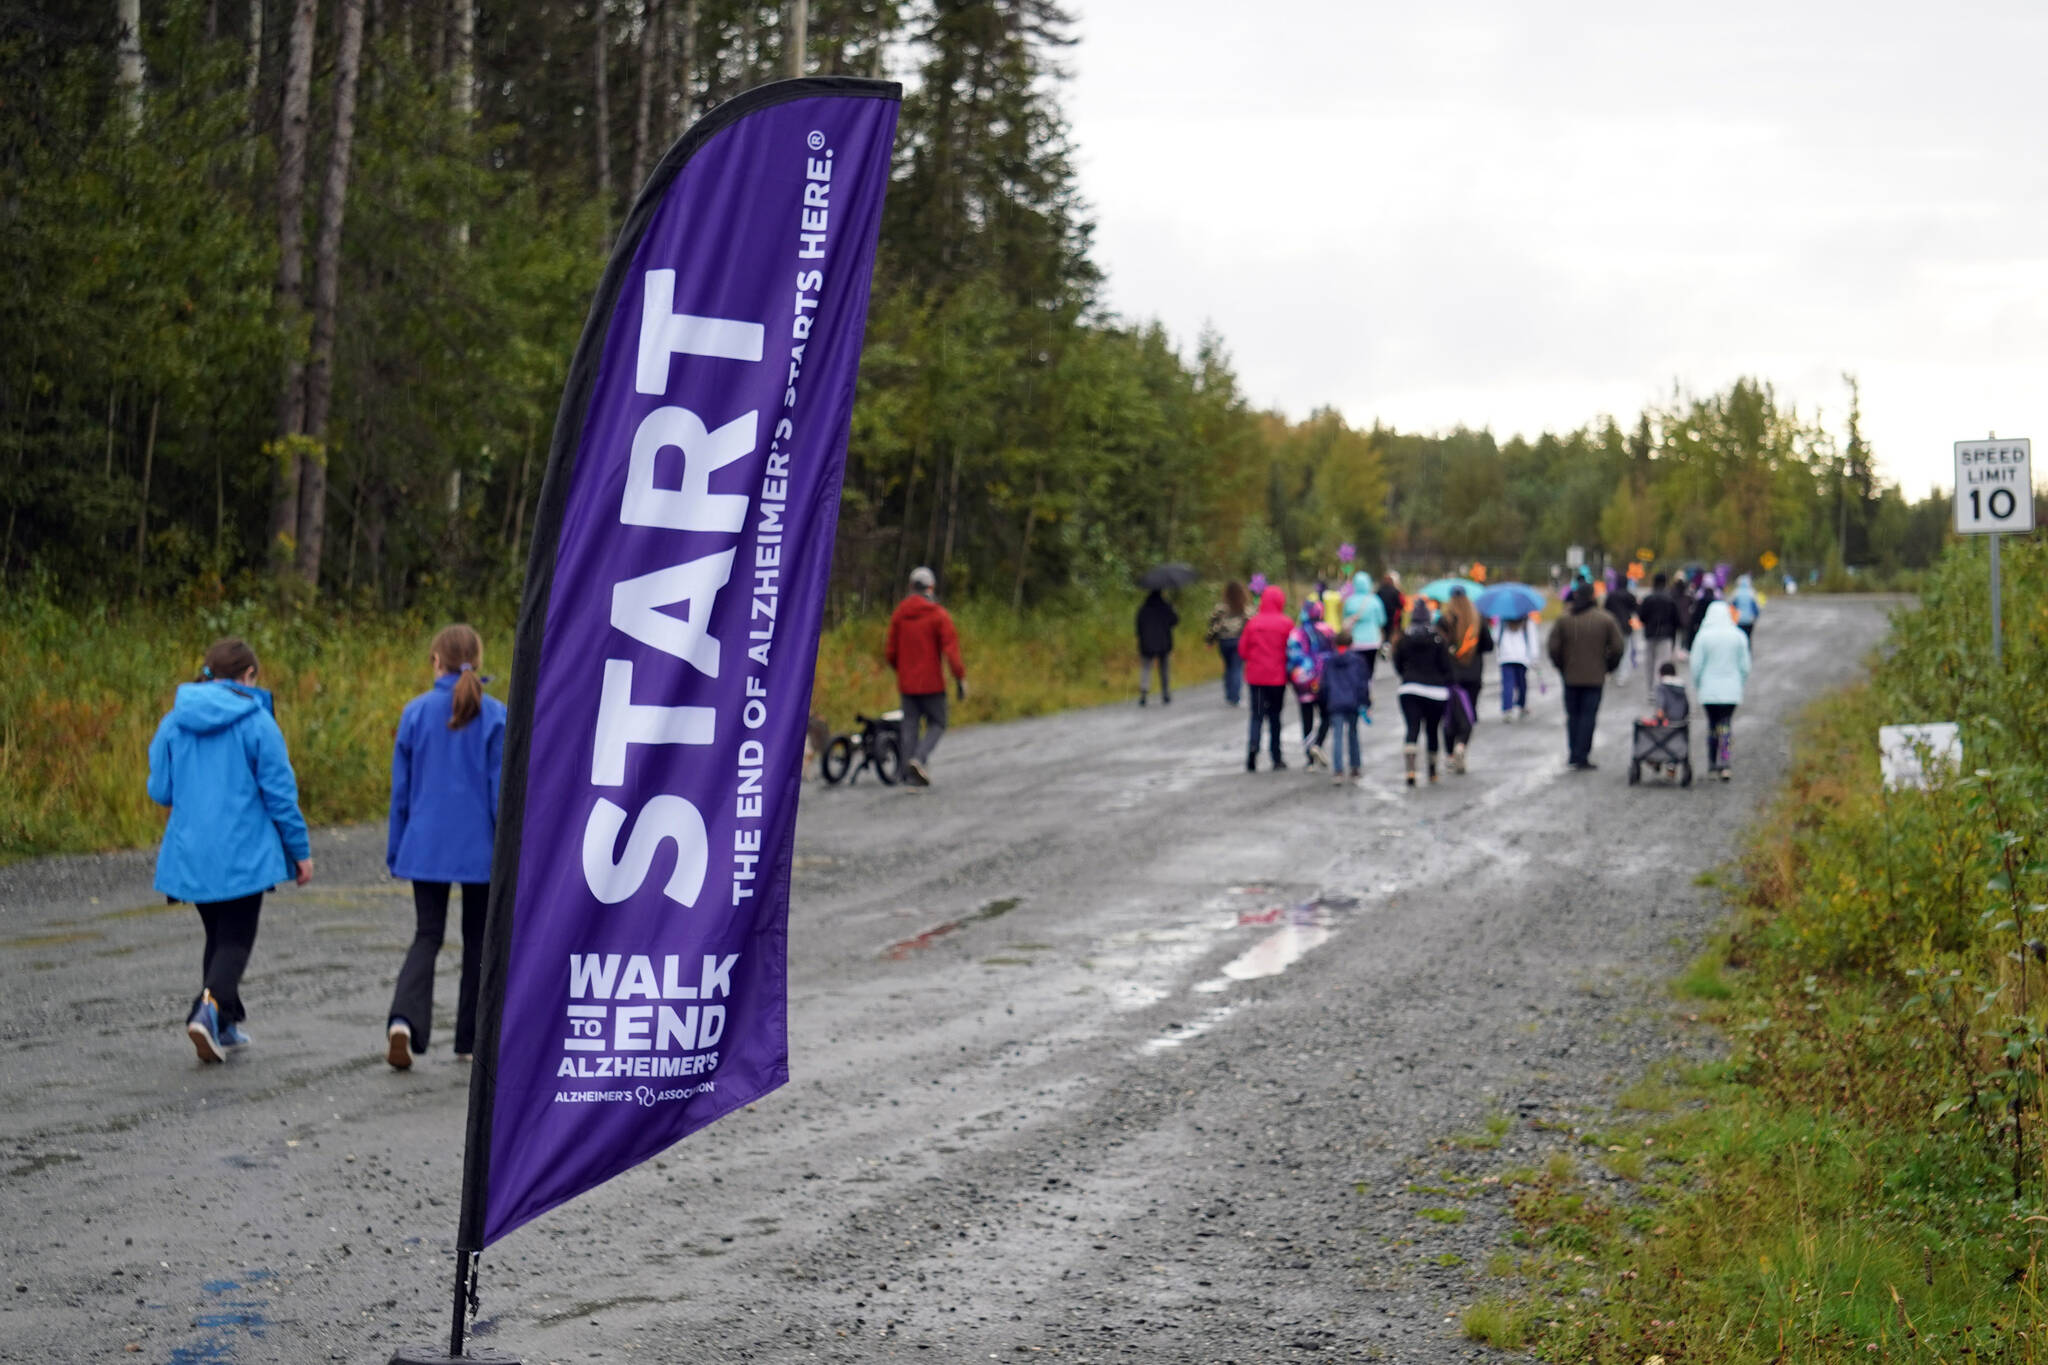 People set out on the Walk to End Alzheimer’s at the Soldotna Regional Sports Complex in Soldotna, Alaska, on Saturday, Sept. 16, 2023. (Jake Dye/Peninsula Clarion)